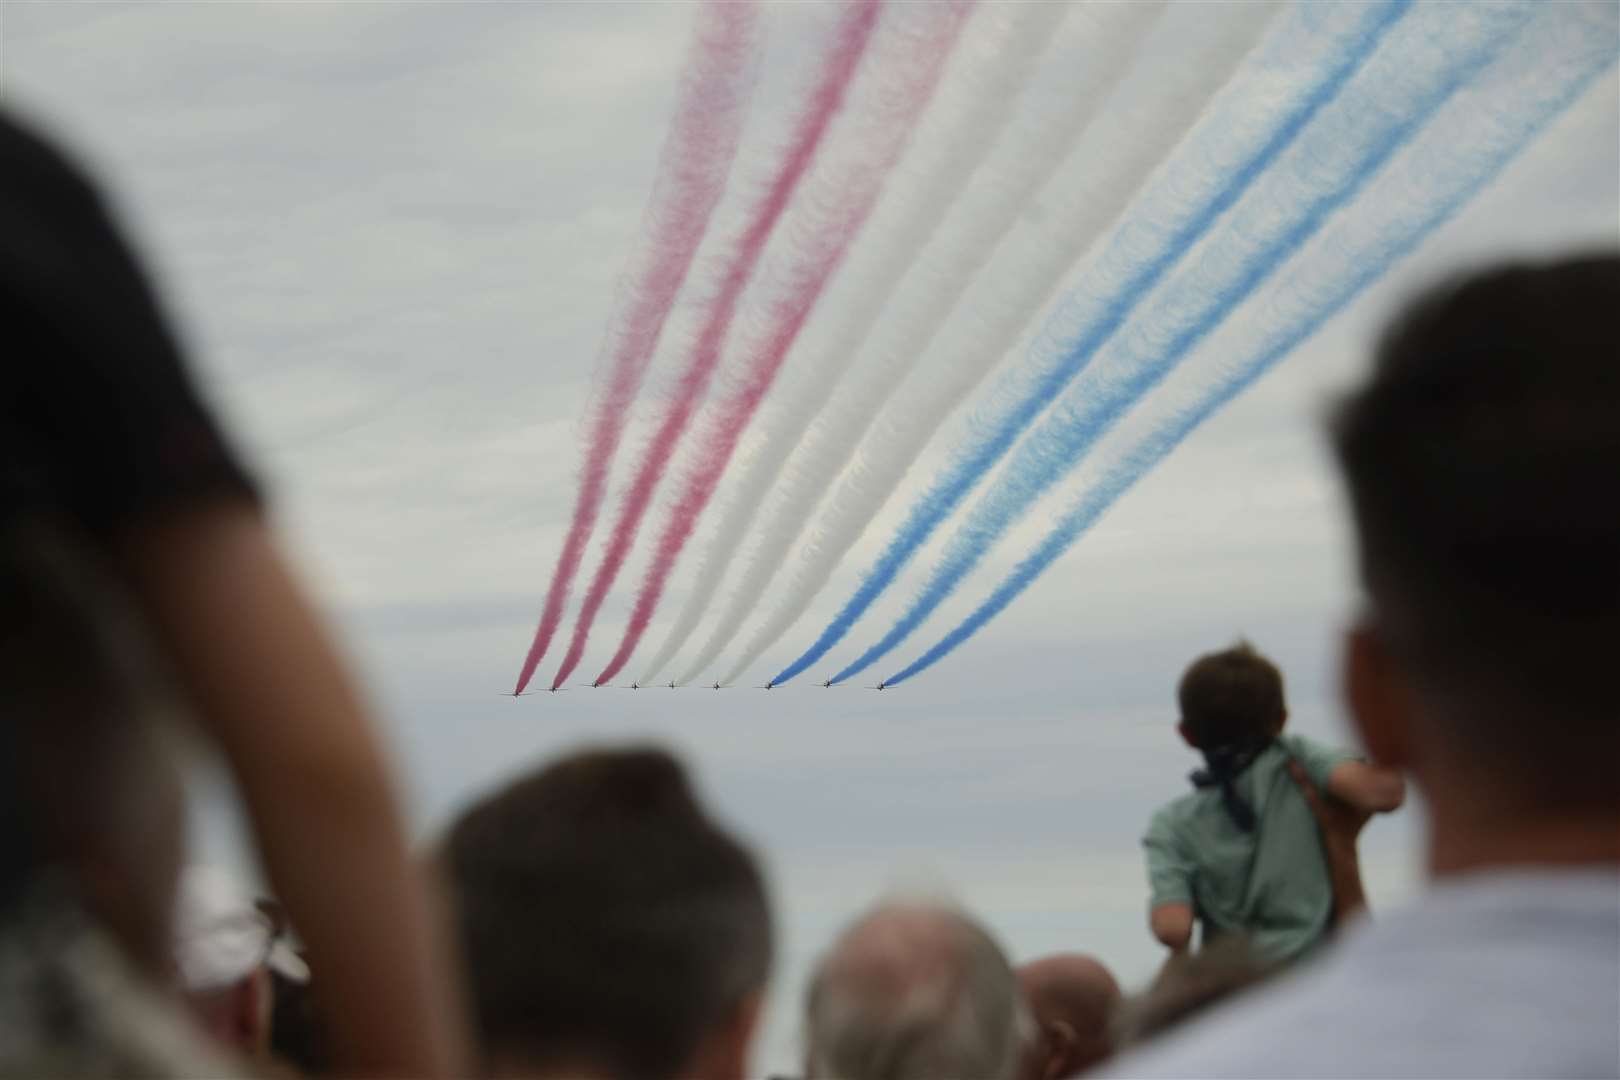 Thousands are expected to watch the display